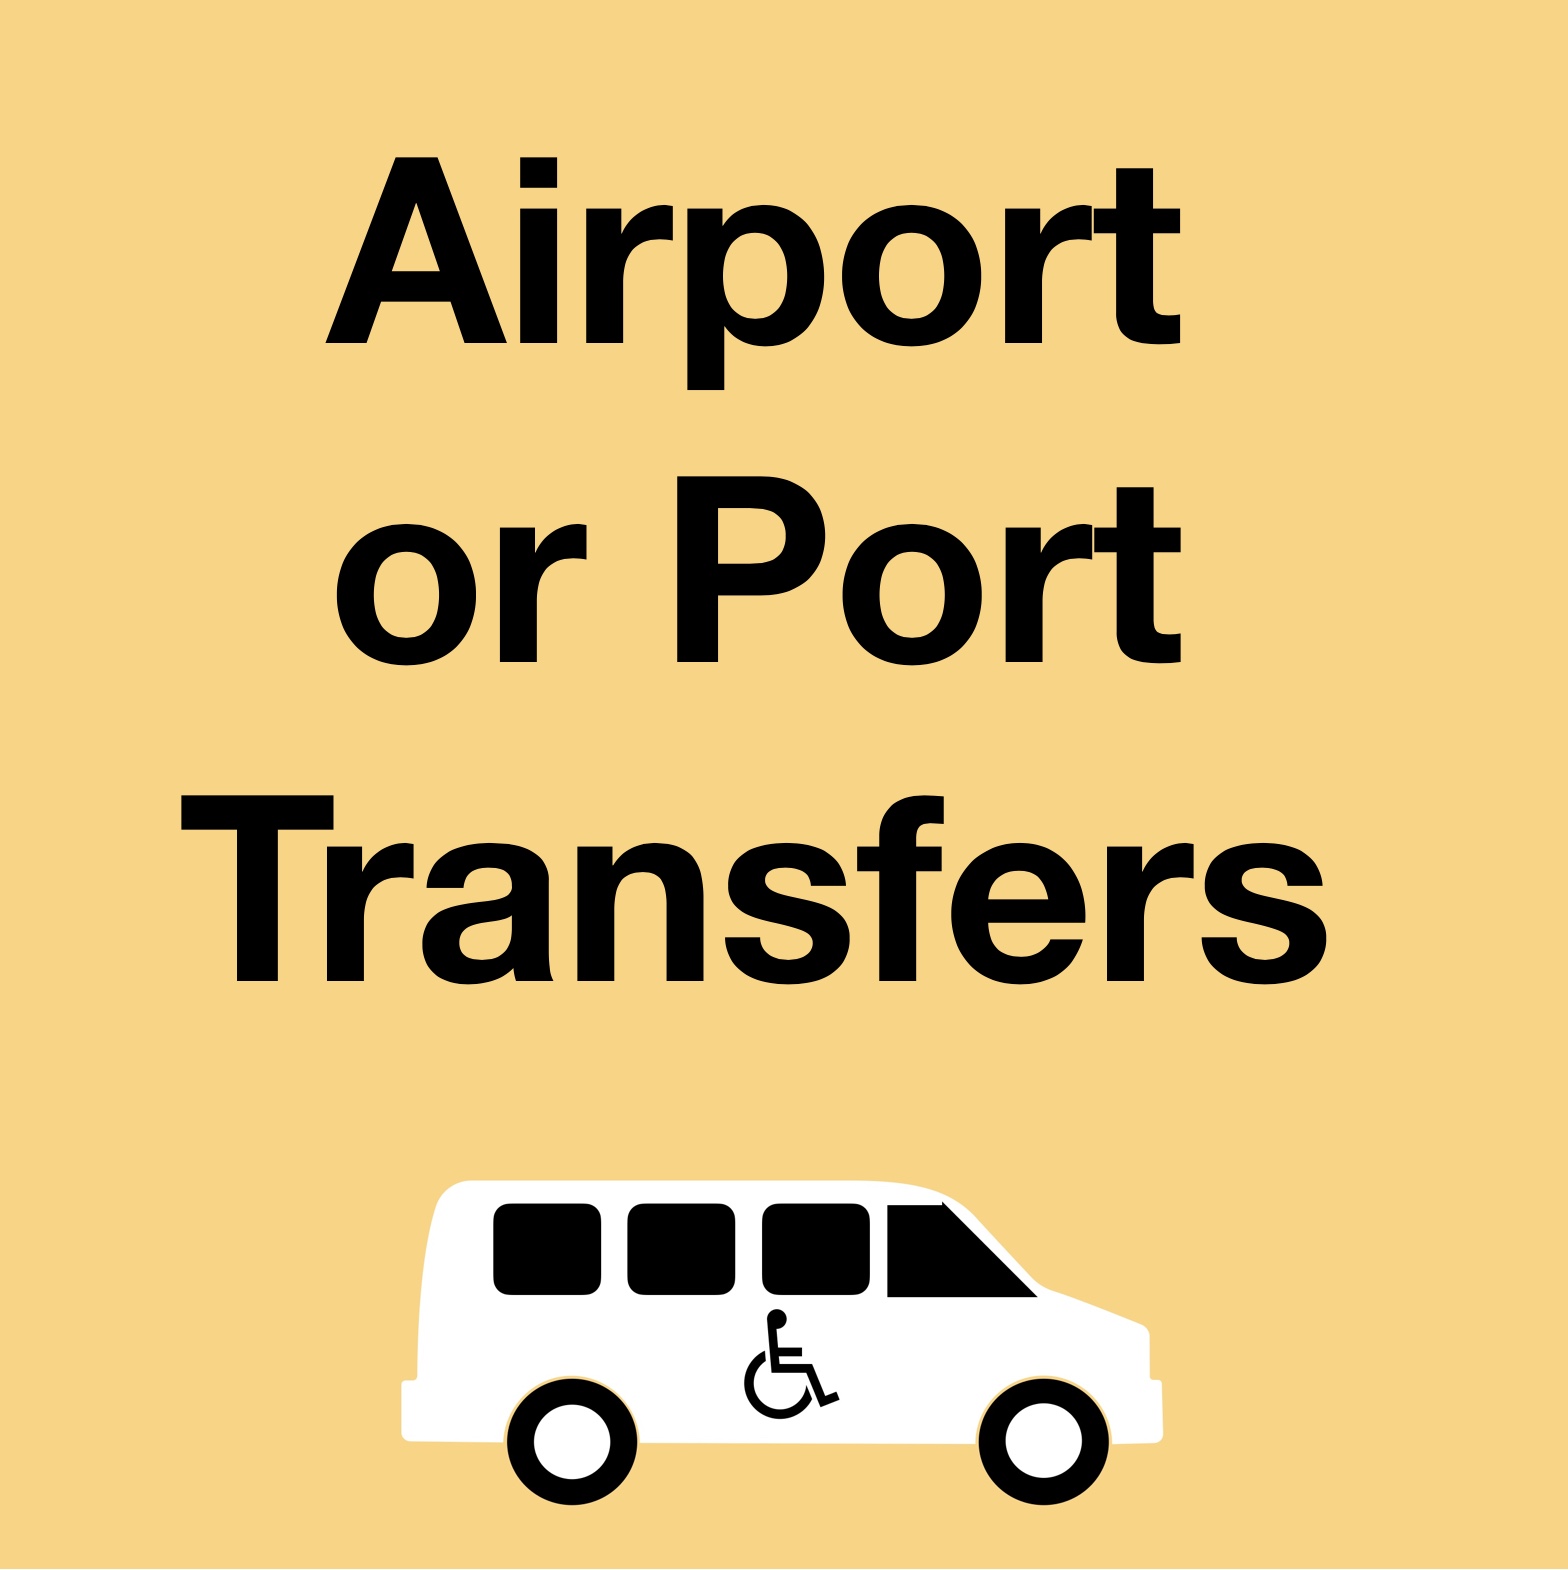 Airport or Port Transfers